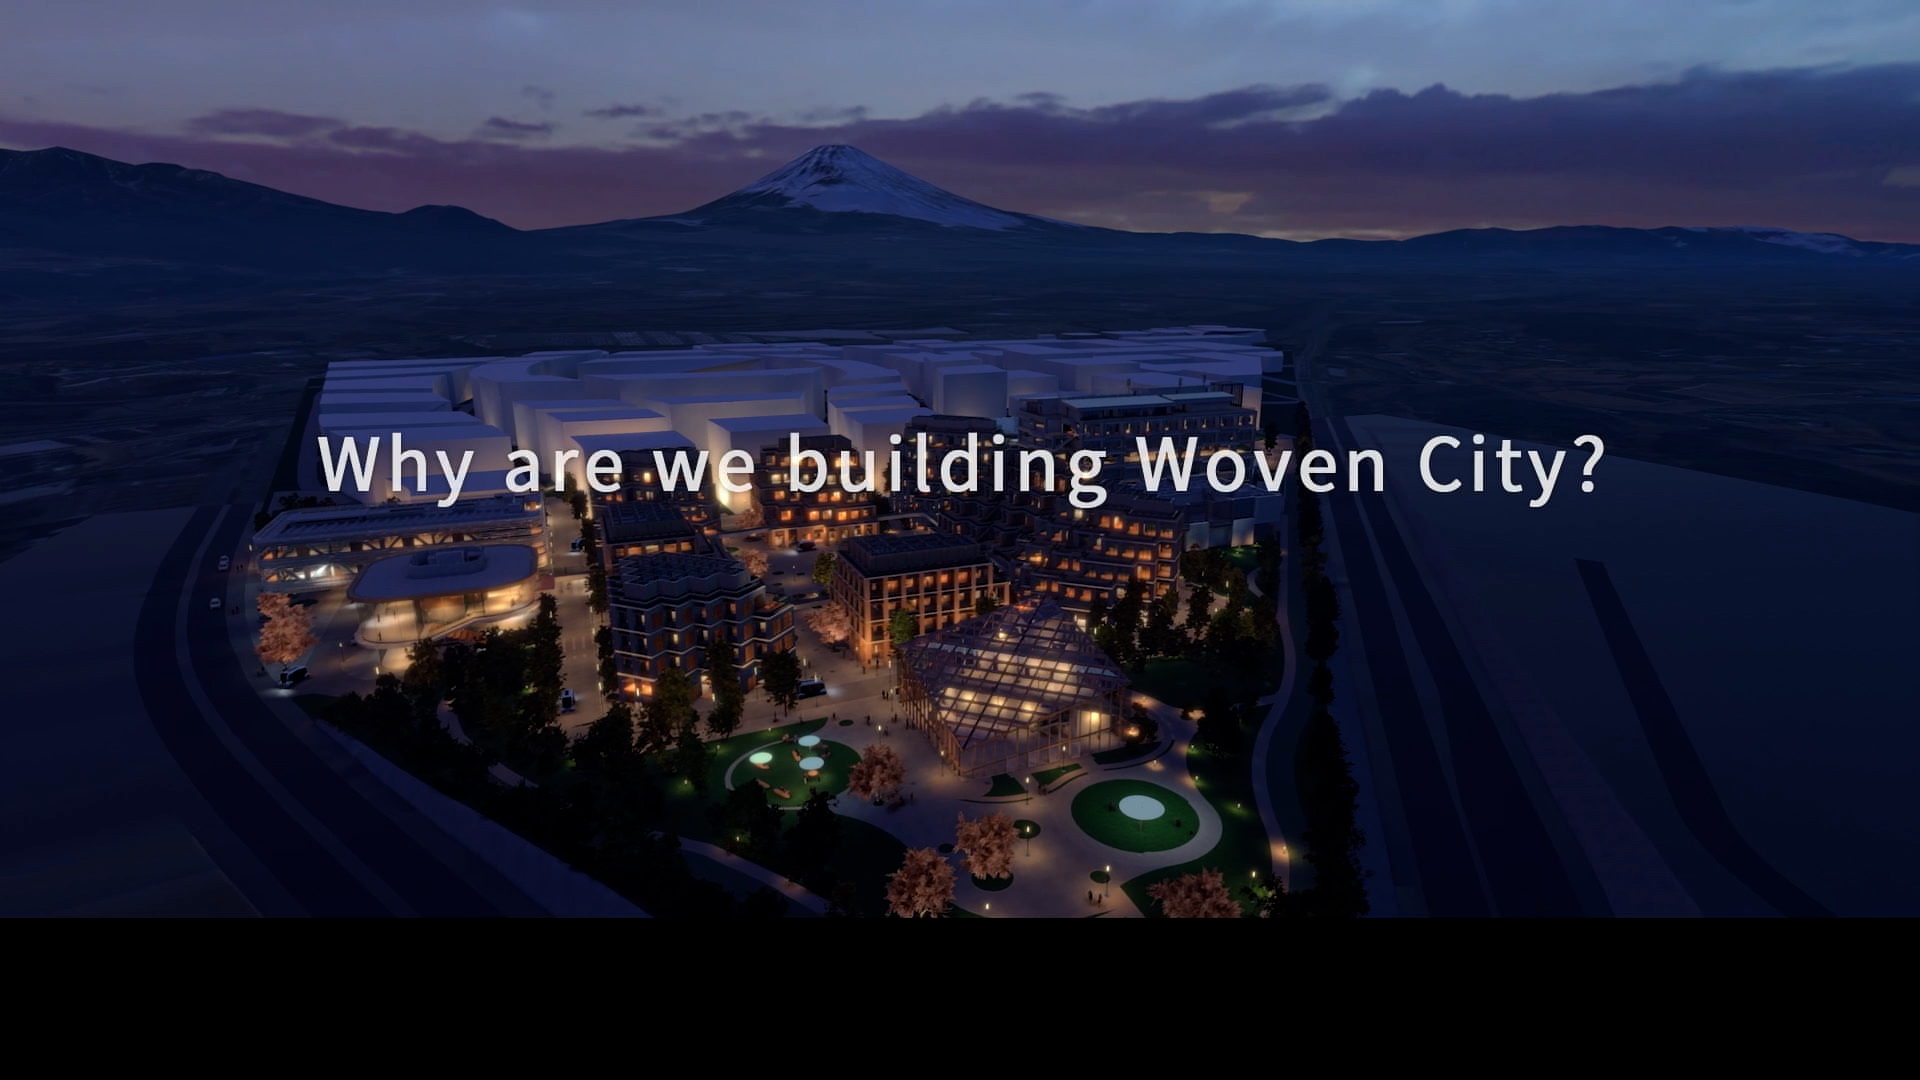 Toyota Woven City　”Why are we building Woven City?”